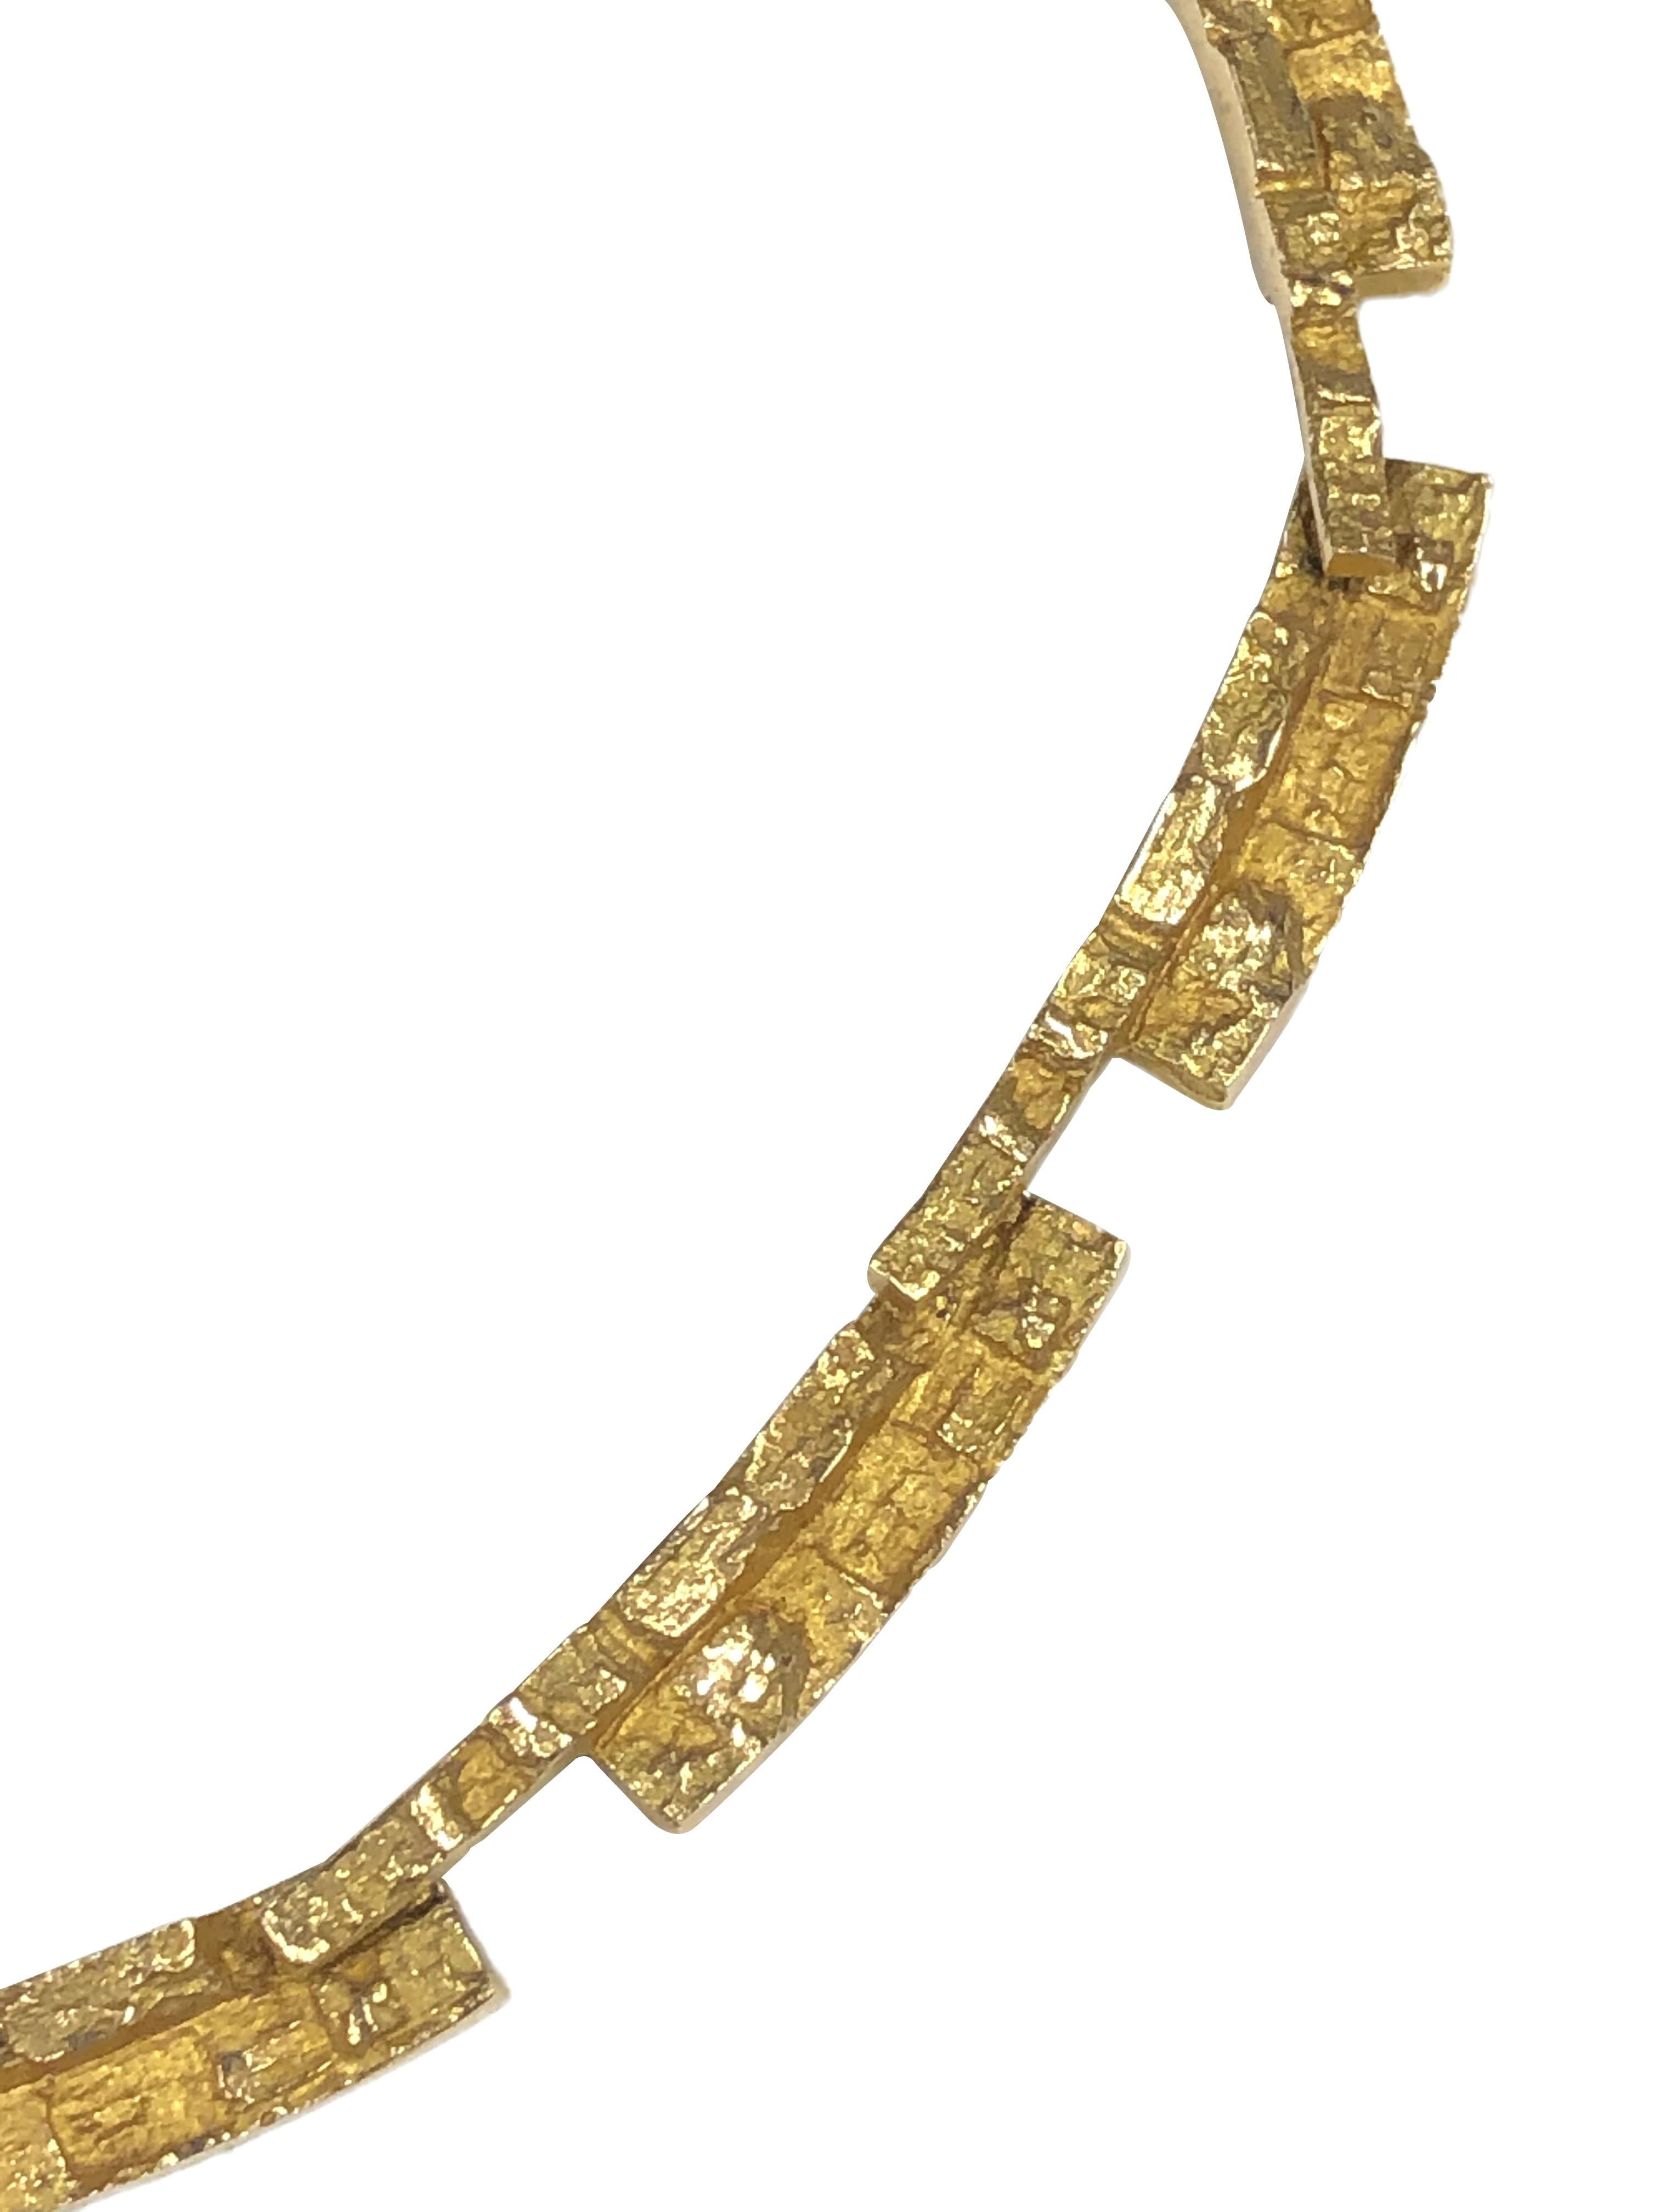 Circa 1968 Bjorn Weckstrom for Lapponia Finland 14k Yellow Gold necklace in a Mid Century Modern design. measuring 16 1/2 inches in length, 3/8 inch wide and weighing 45.3 Grams. Flexible, integrated Textured links.  